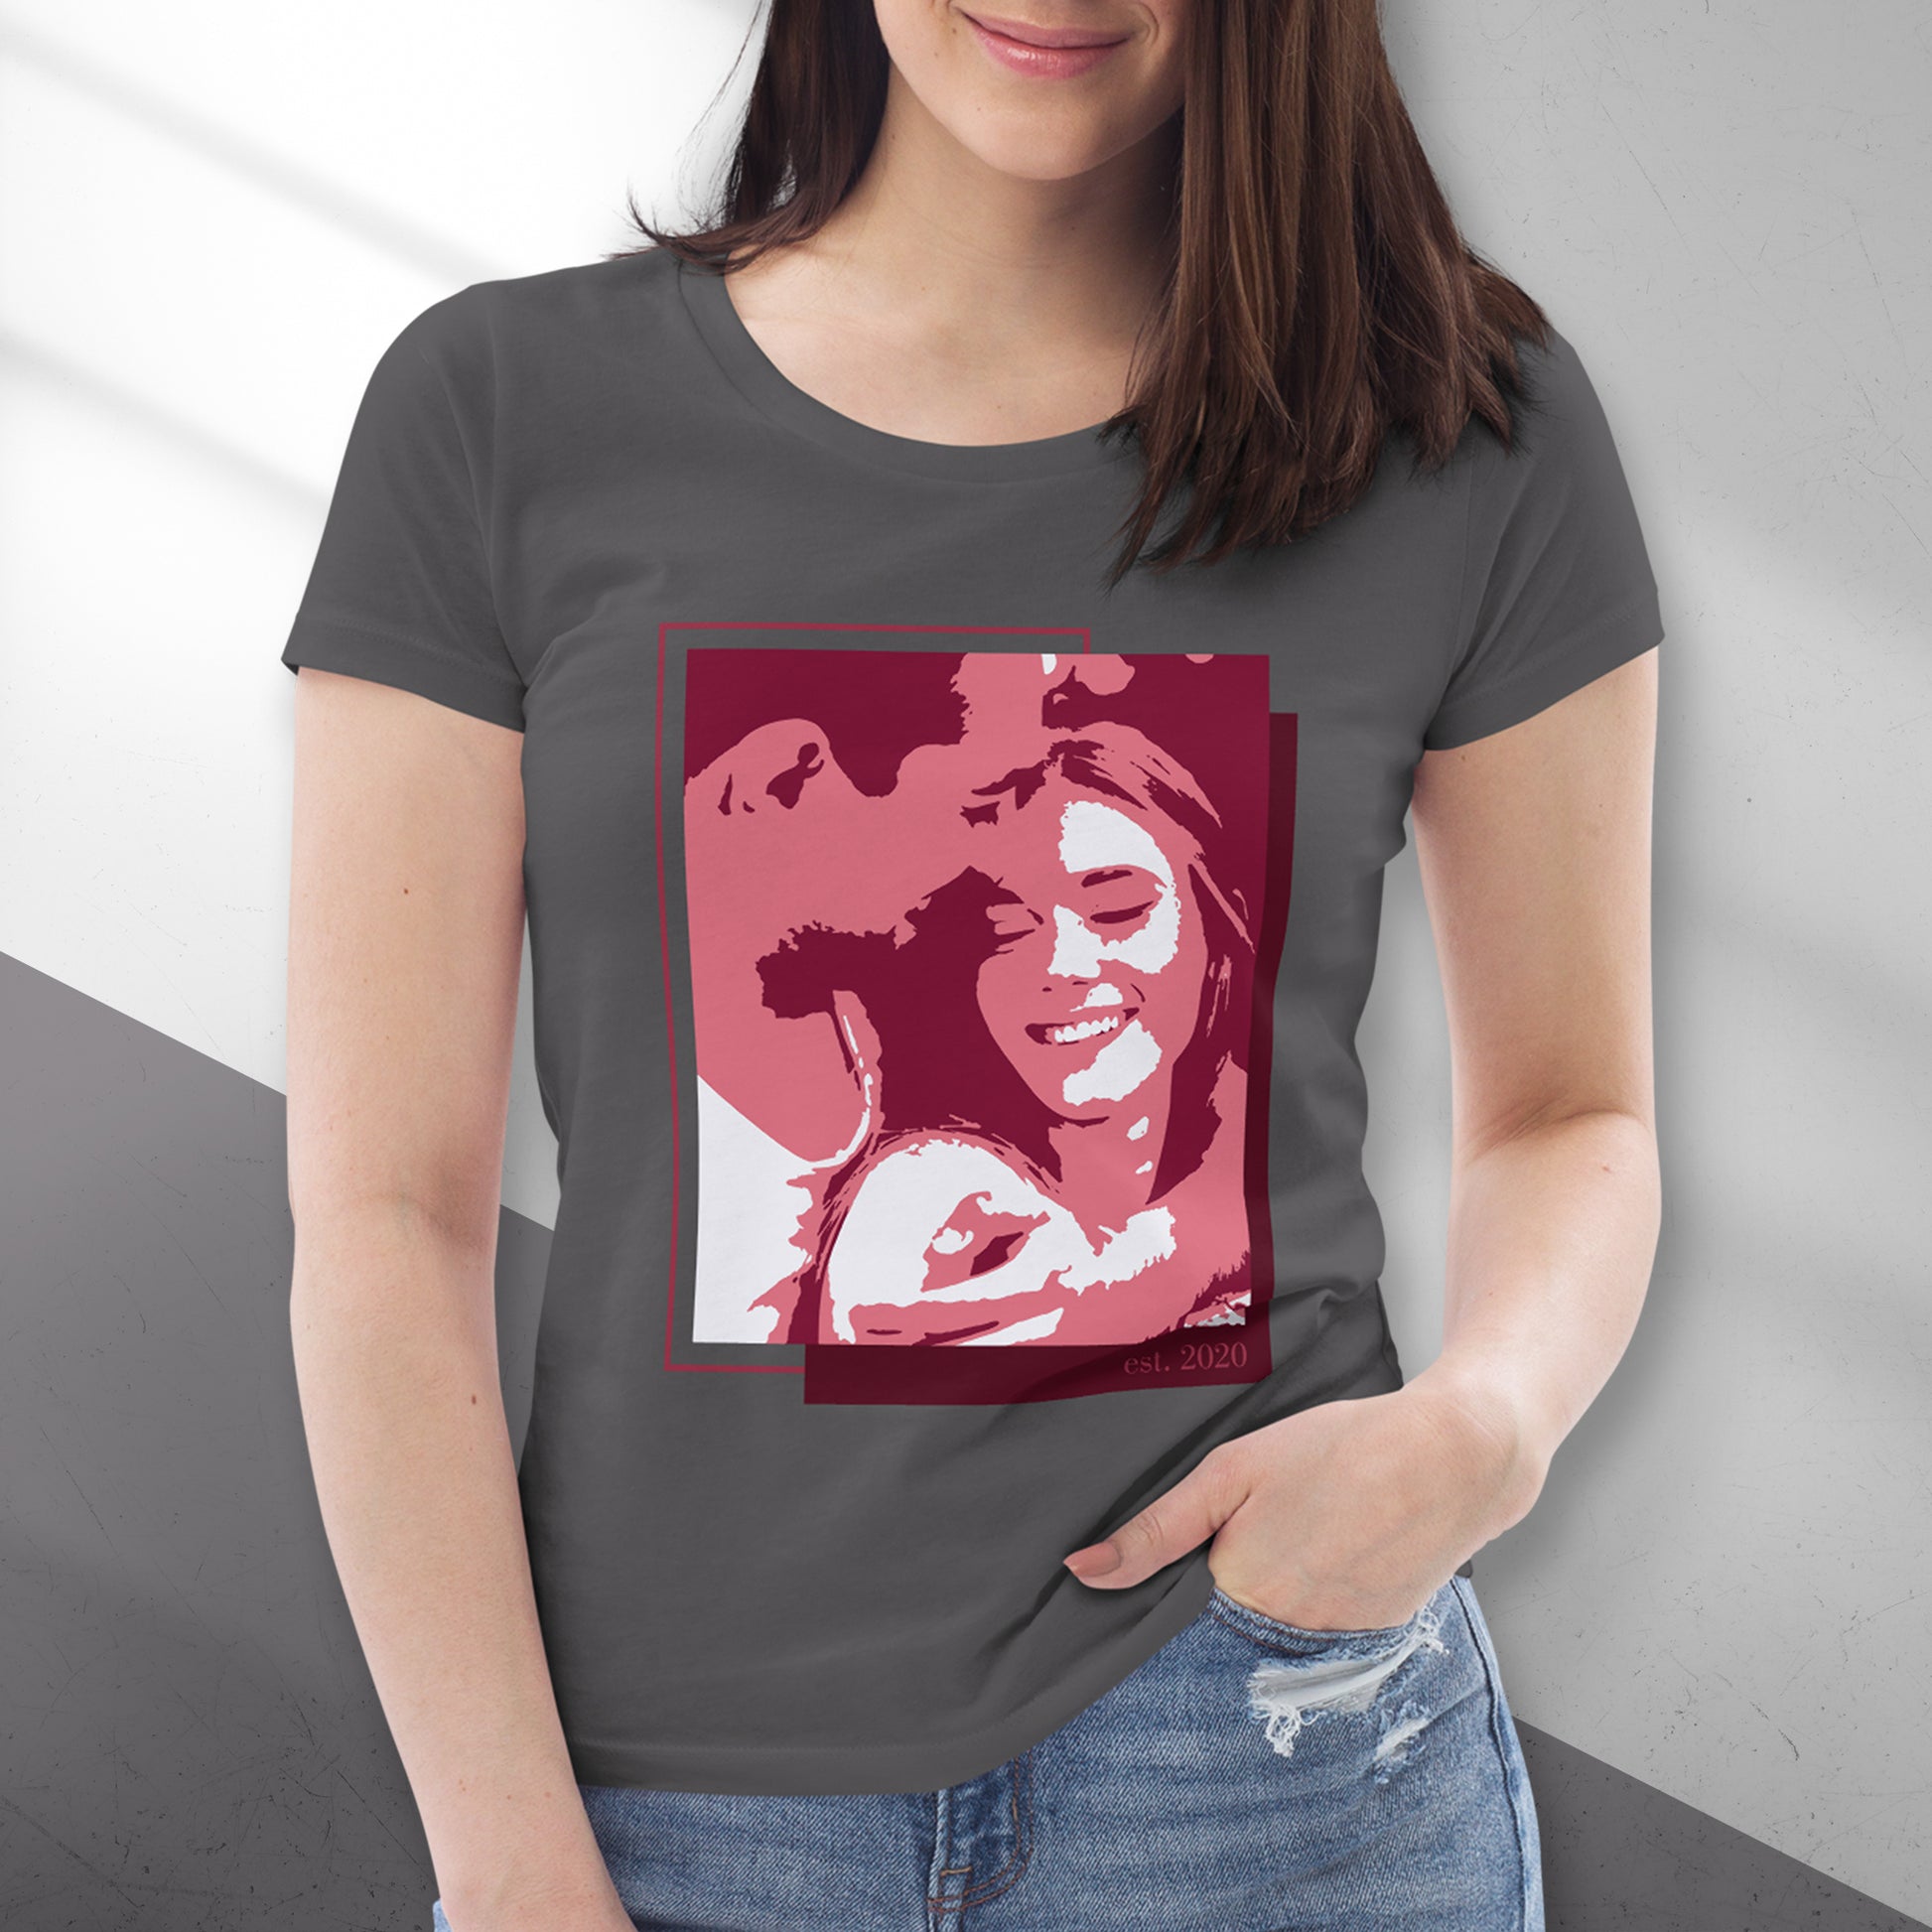 Personalized Women's T-Shirt in anthrecite - Large Portrait in Red | Seepu